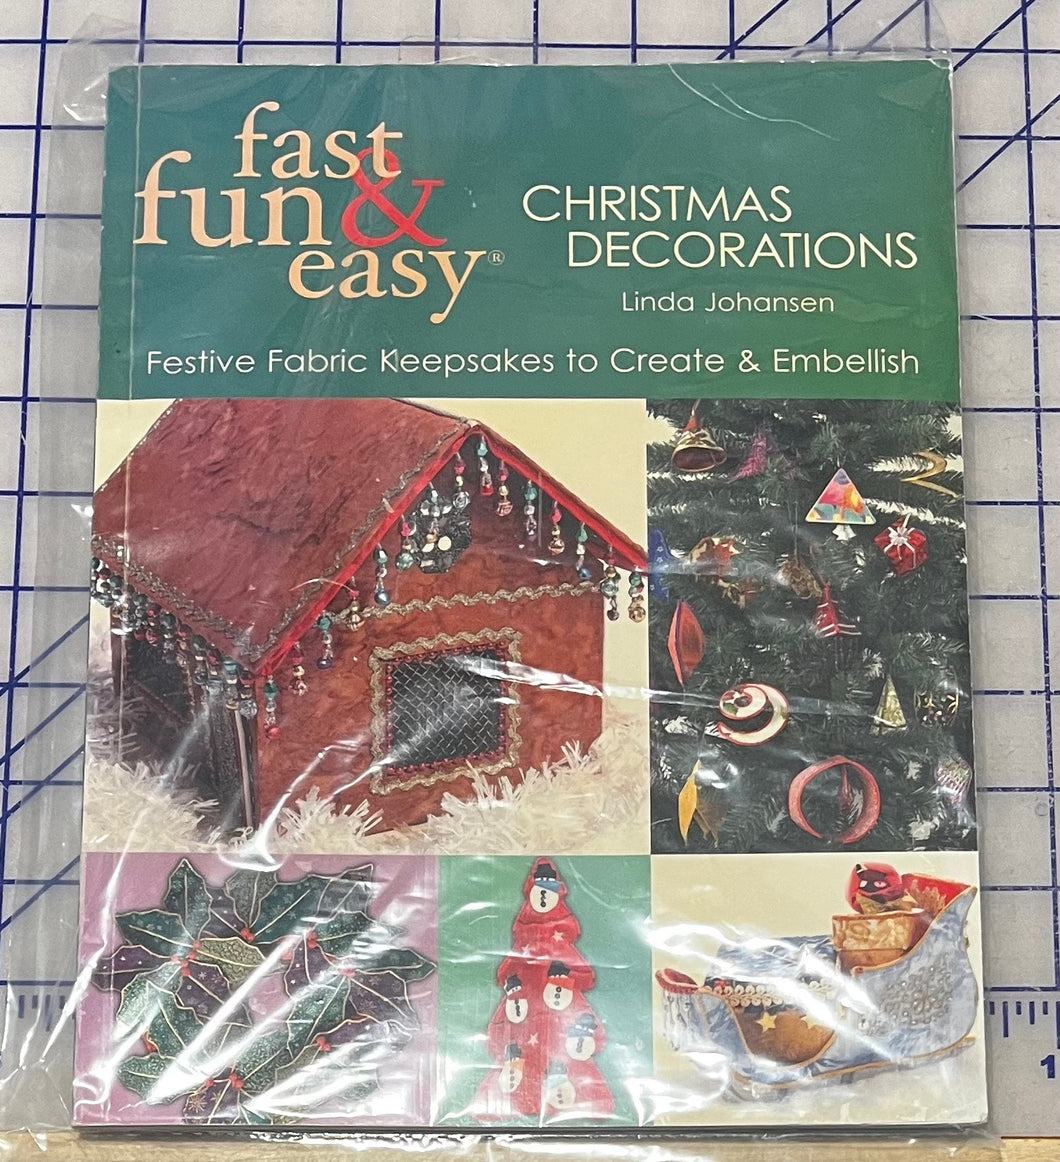 Fast Fun and Easy Christmas Decorations